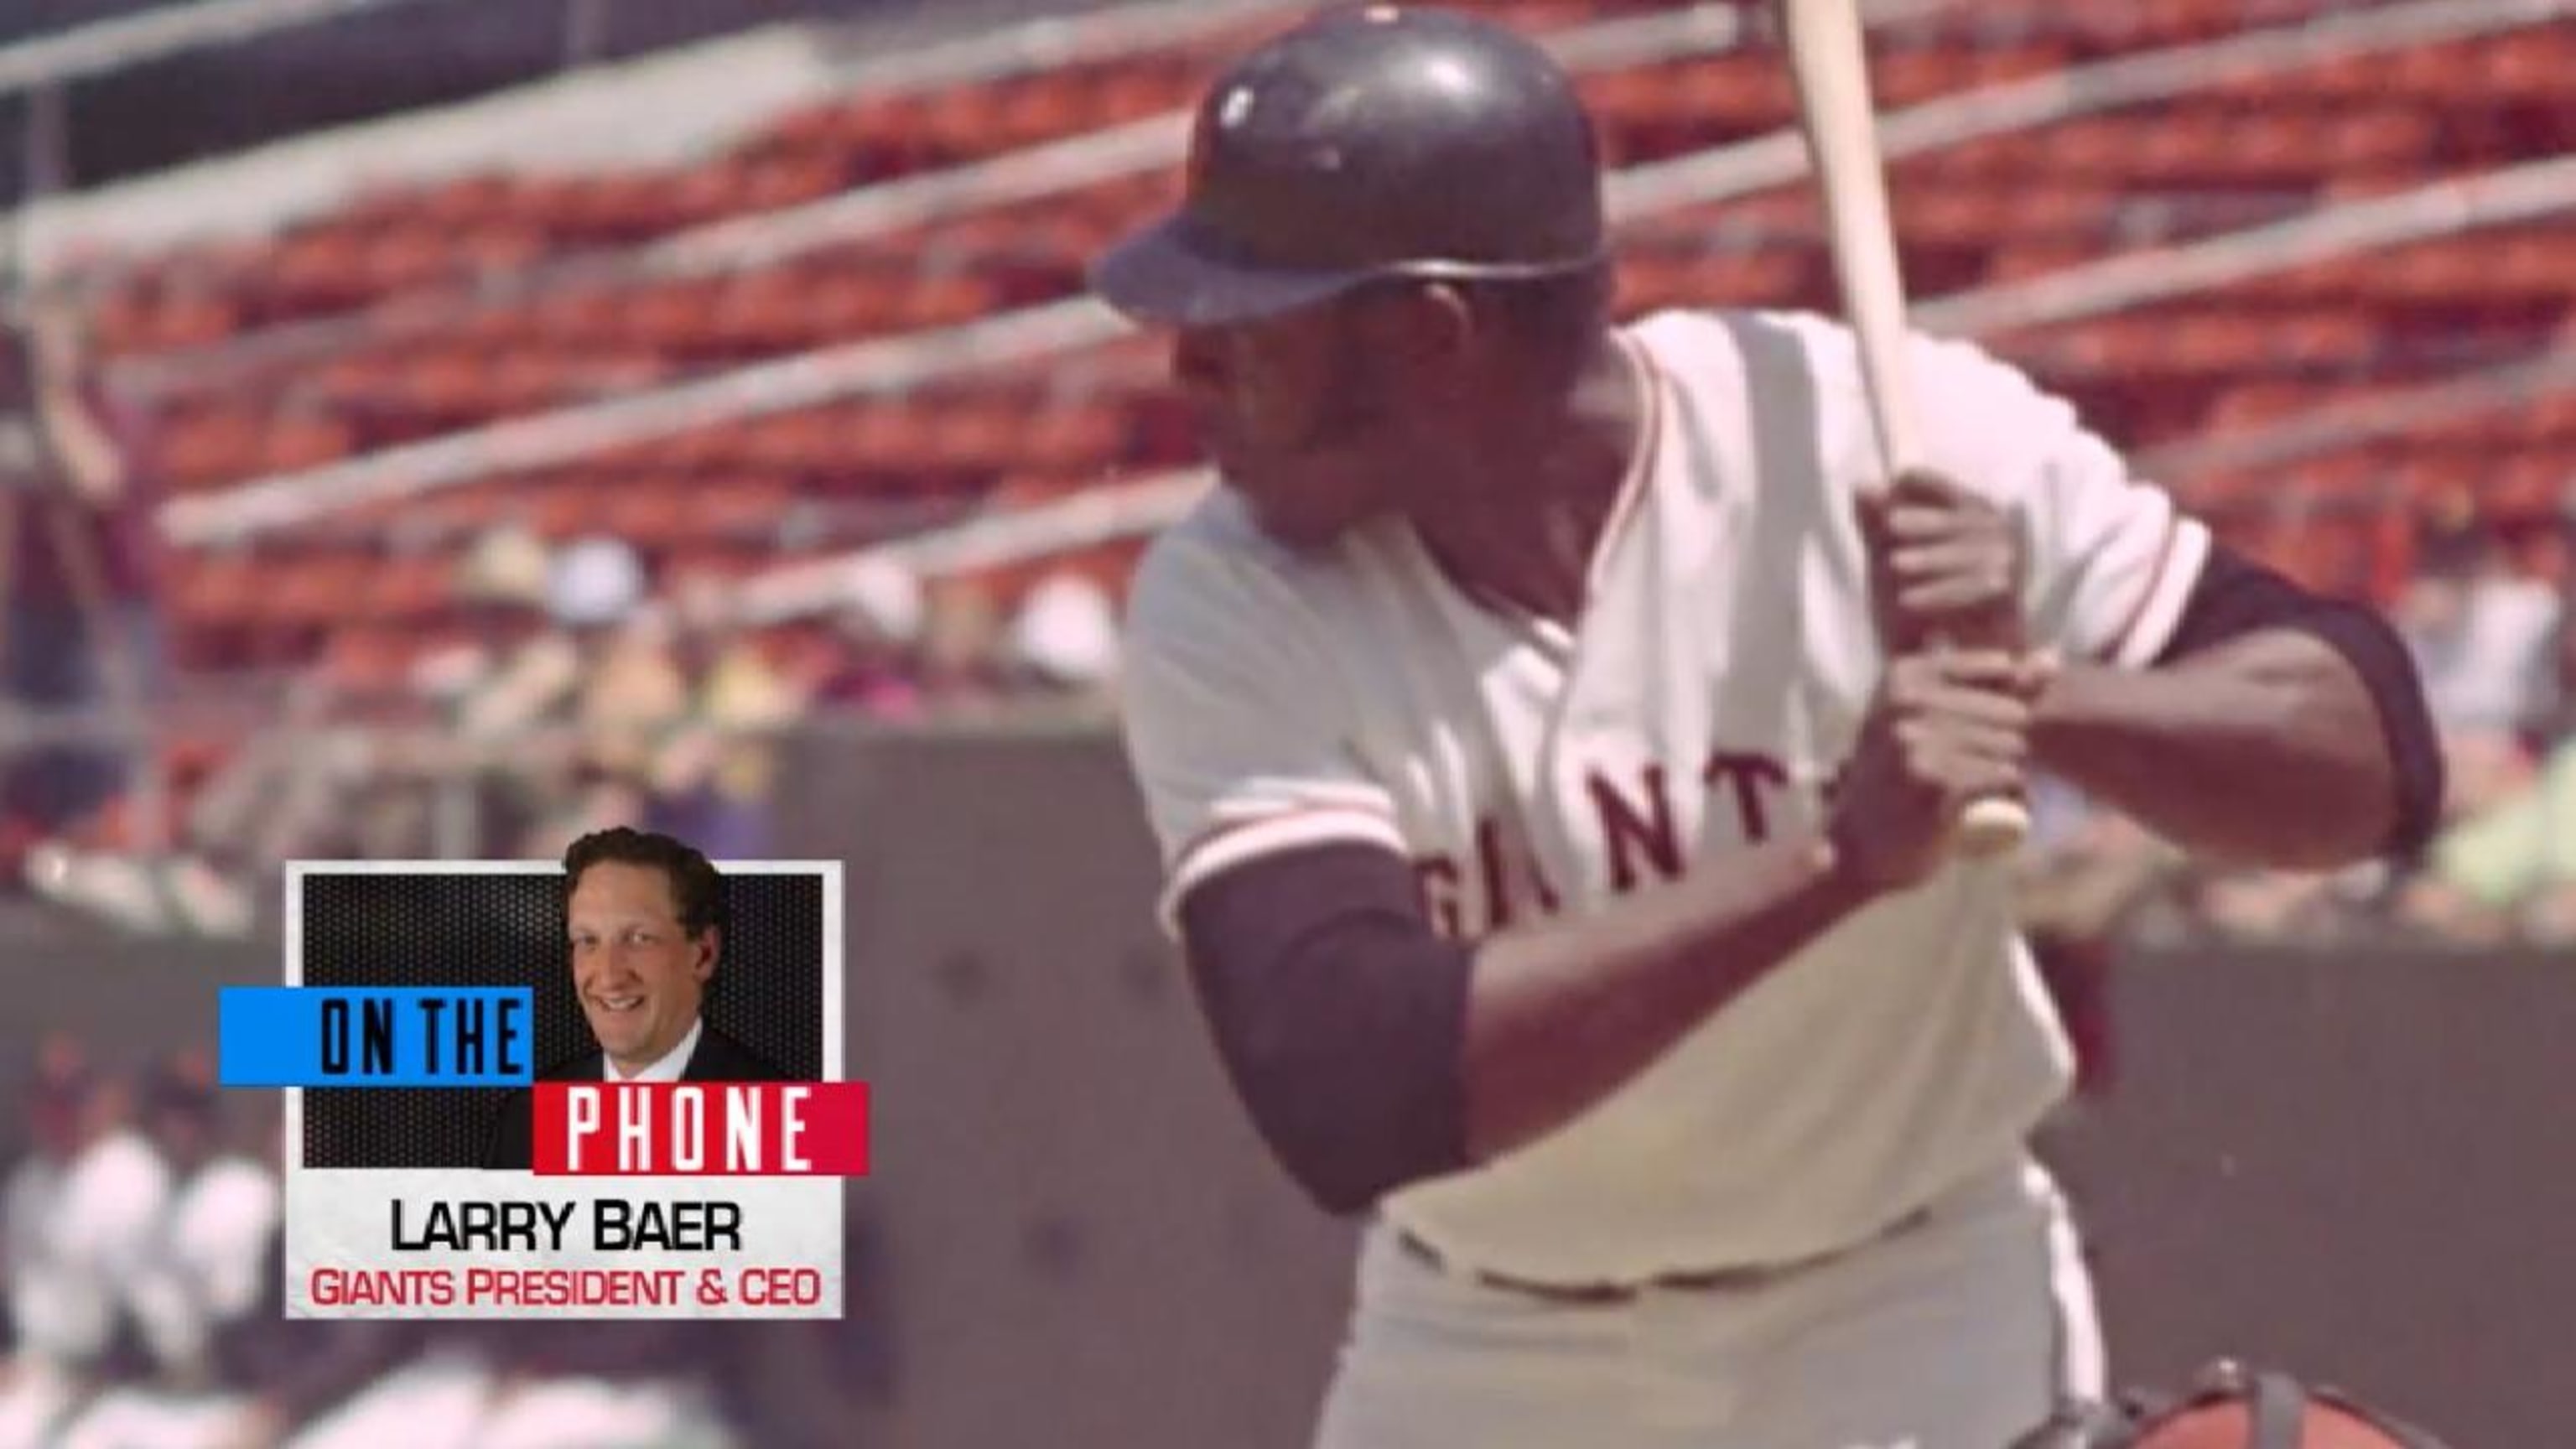 Giants Hall of Famer Willie McCovey dies at 80